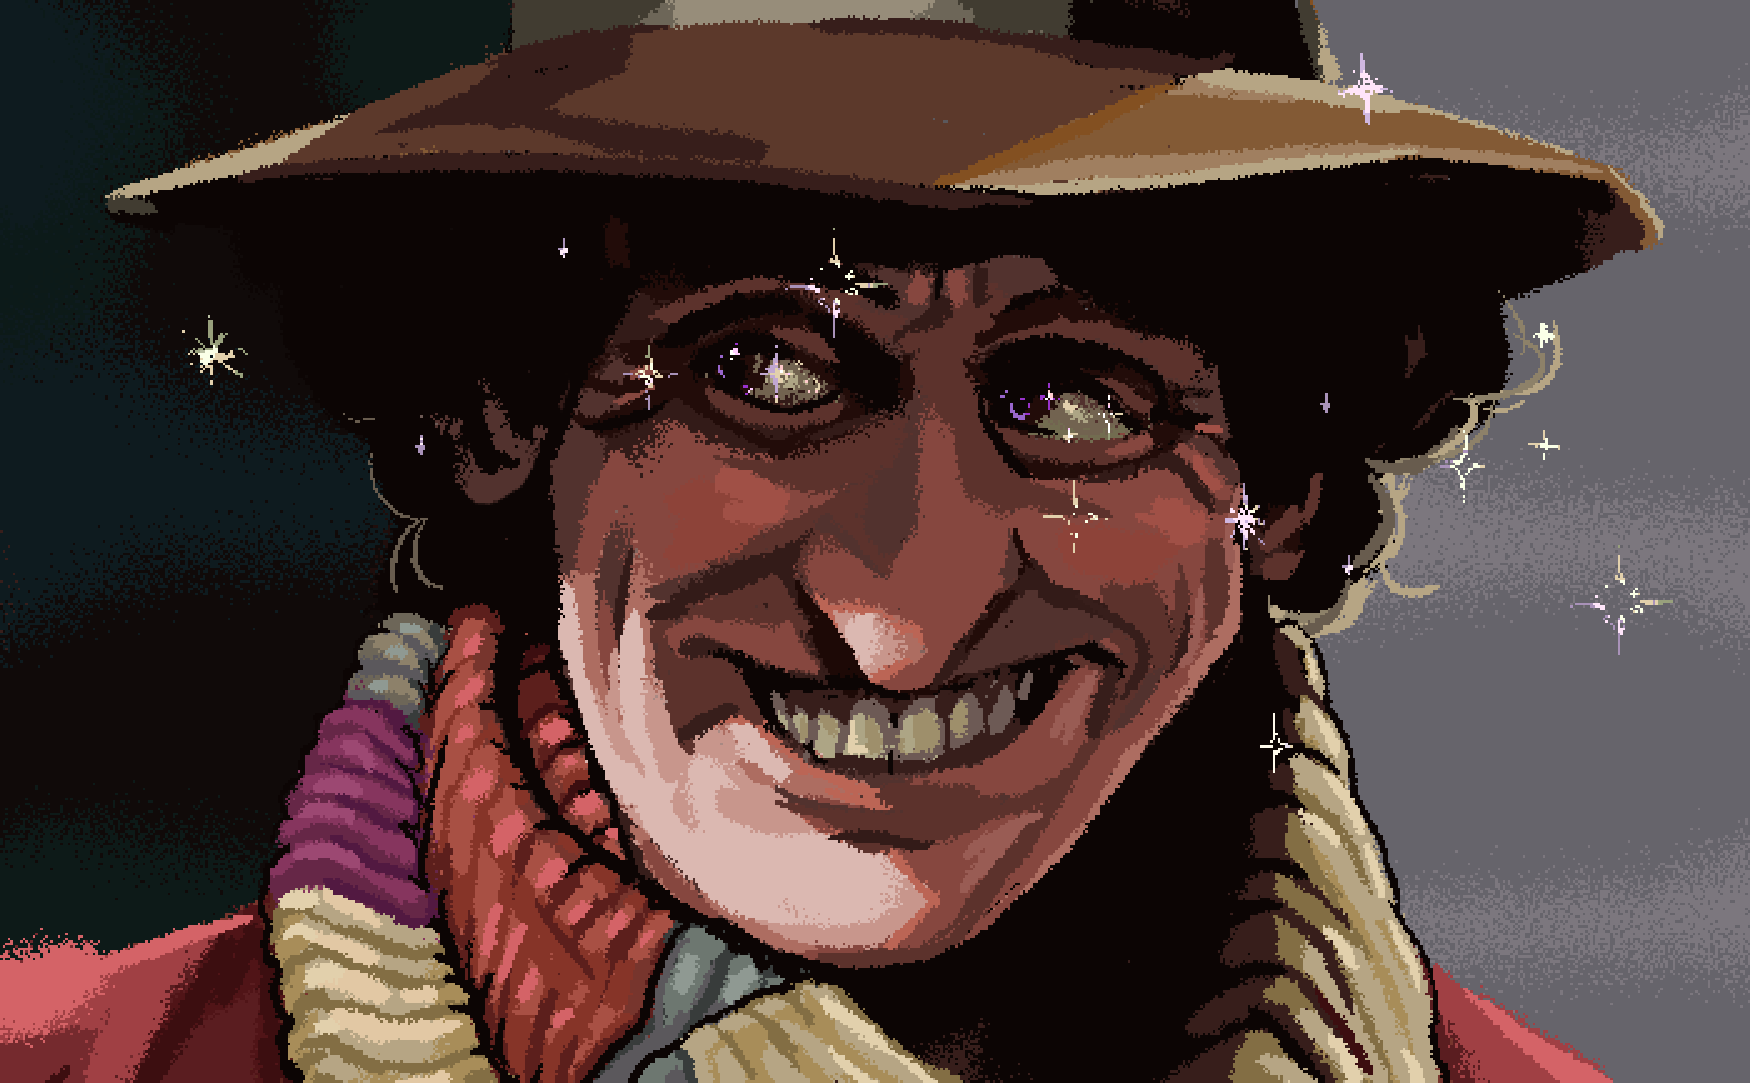 Pixel art portrait of the fourth Doctor from Doctor Who. It shows him in close up smiling mischievously with sparkles all around his eyes and eyeline. He is wearing a hat and scarf, and he has huge teeth and eyes.